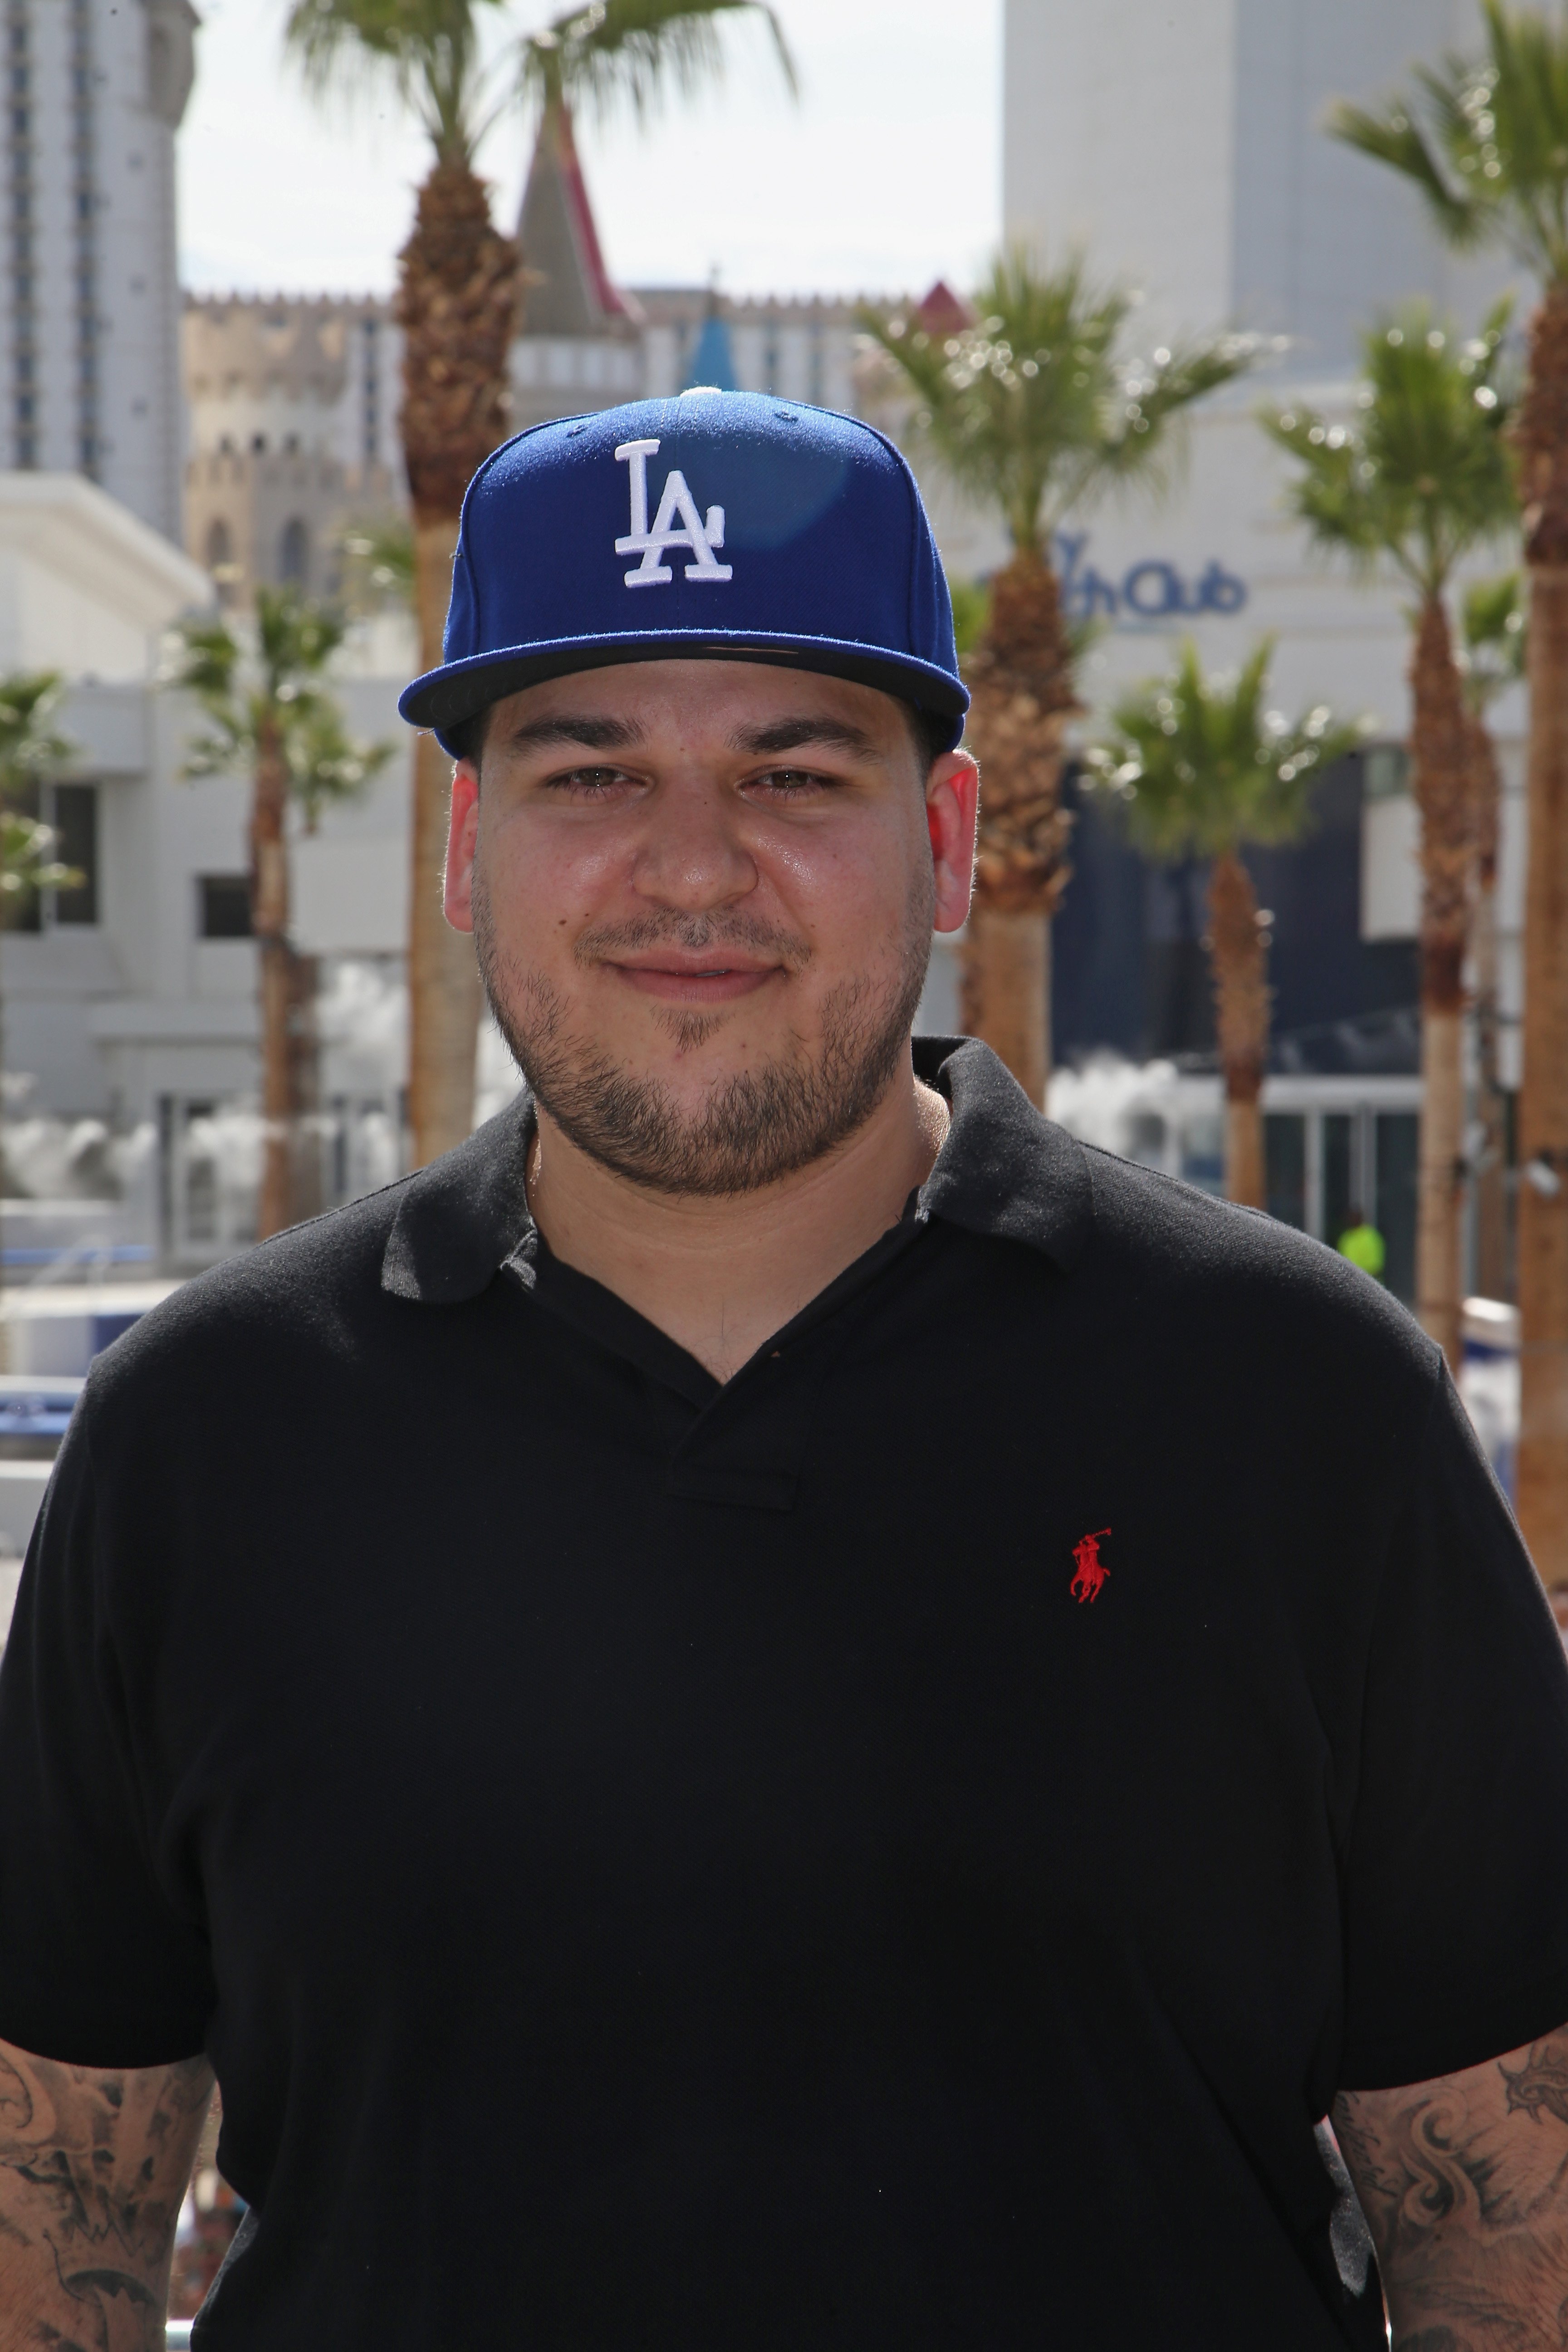 Rob Kardashian at the Sky Beach Club at the Tropicana Las Vegas in May 2016. | Photo: Getty Images